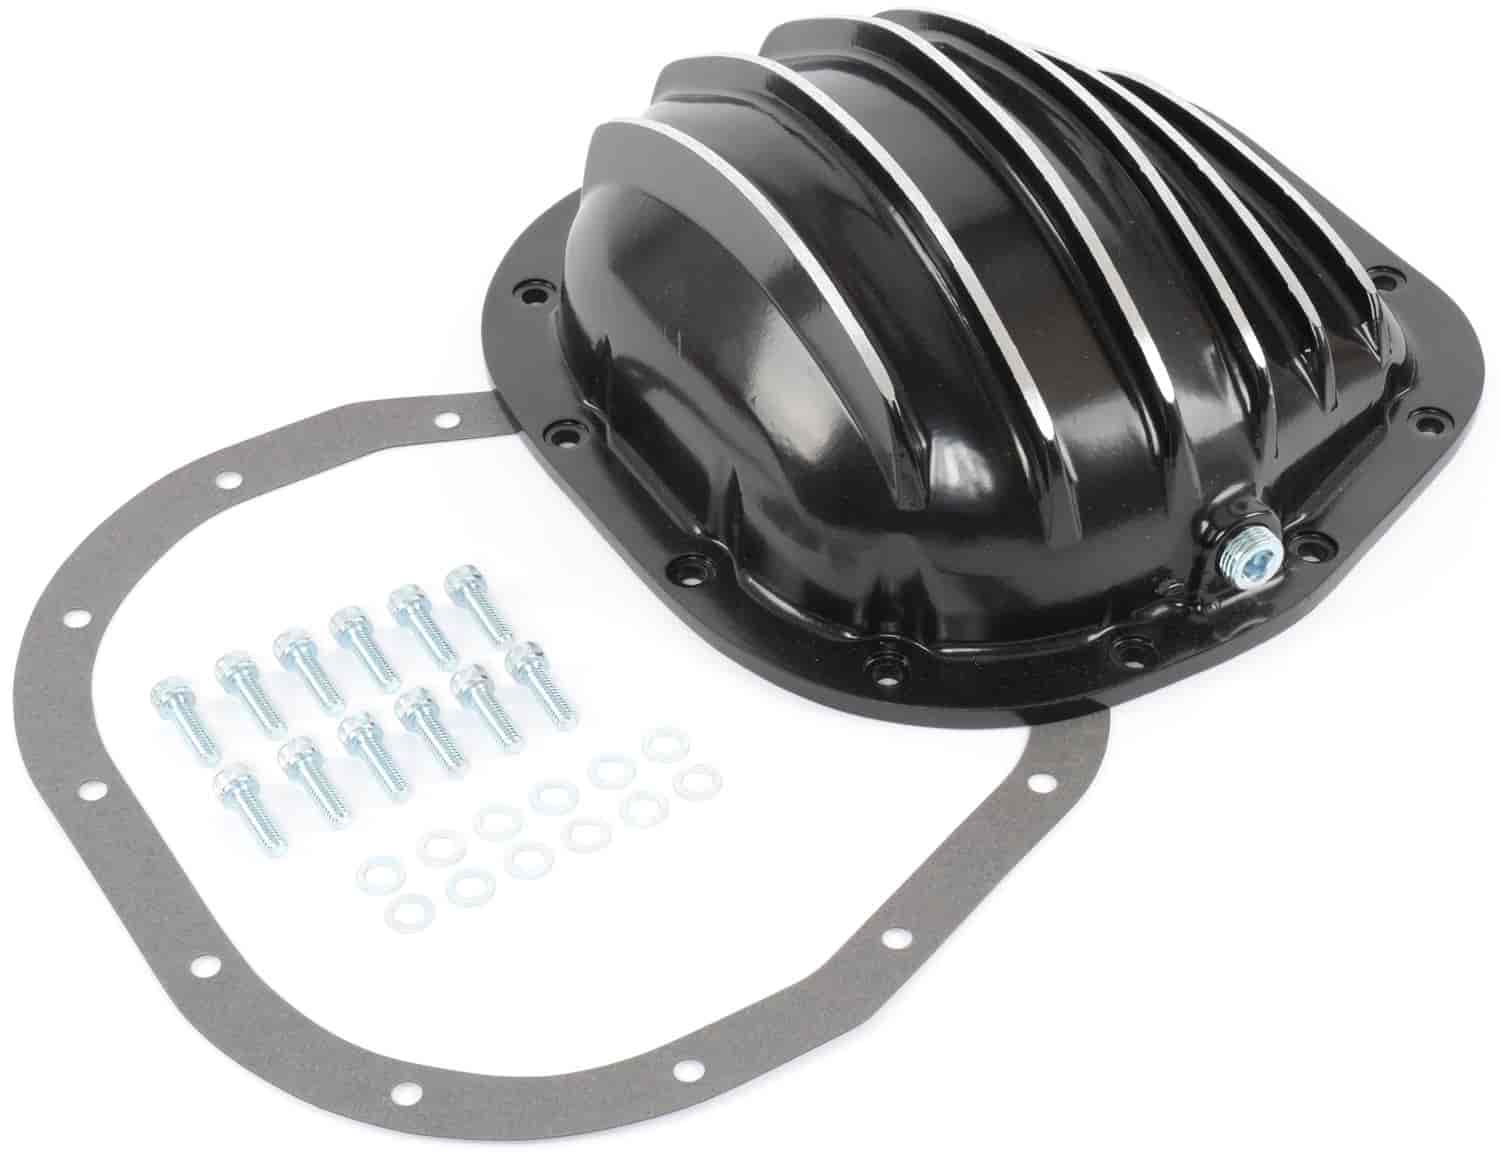 Cast Aluminum Differential Cover, Black [Ford 10.25 in. and 10.5 in. 12-Bolt, Truck]